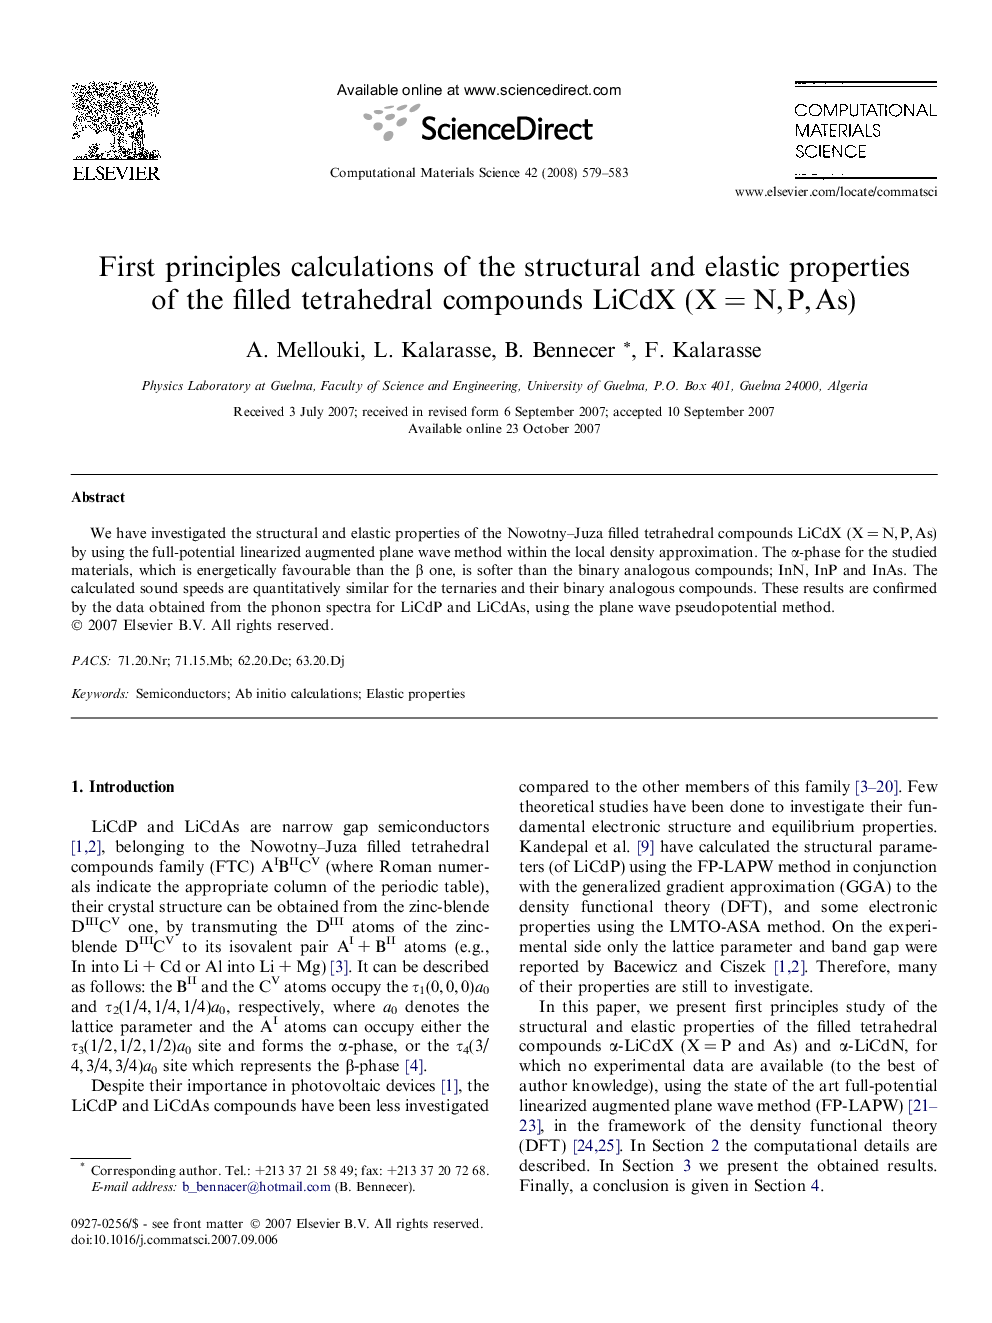 First principles calculations of the structural and elastic properties of the filled tetrahedral compounds LiCdX (X = N, P, As)